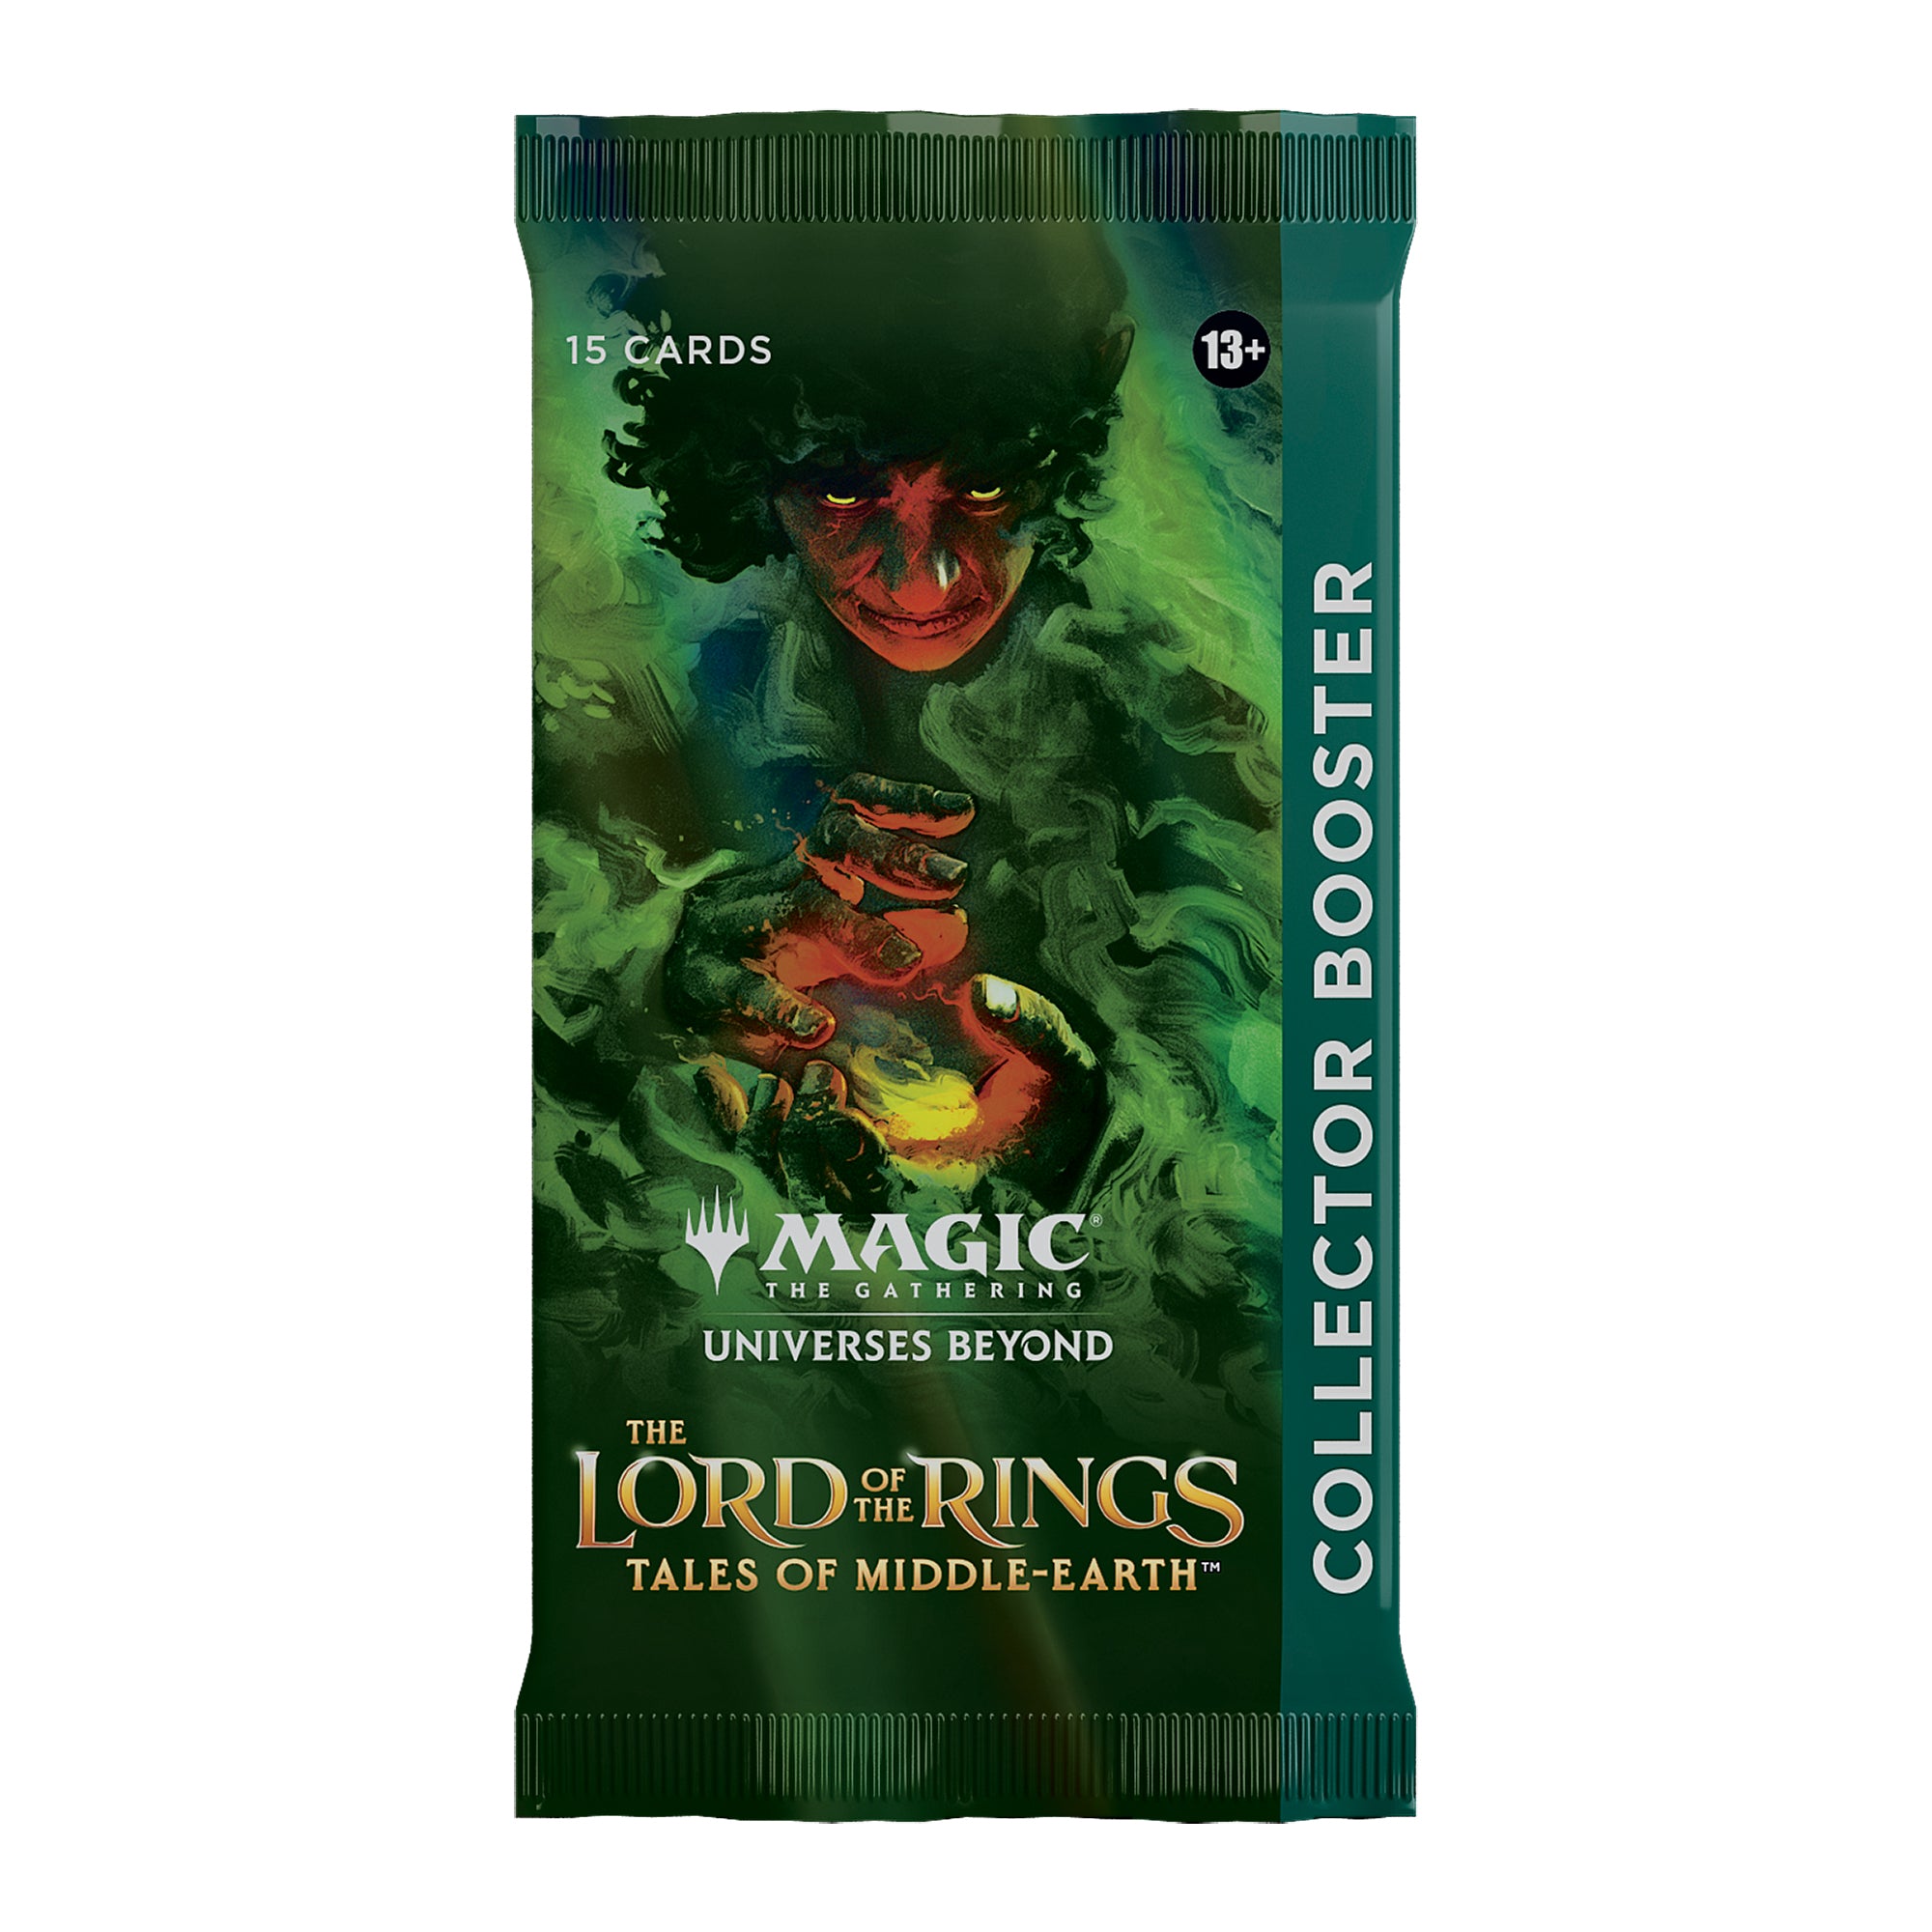 Magic: The Gathering Universes Beyond The Lord of the Rings: Tales of Middle-earth collector booster pack